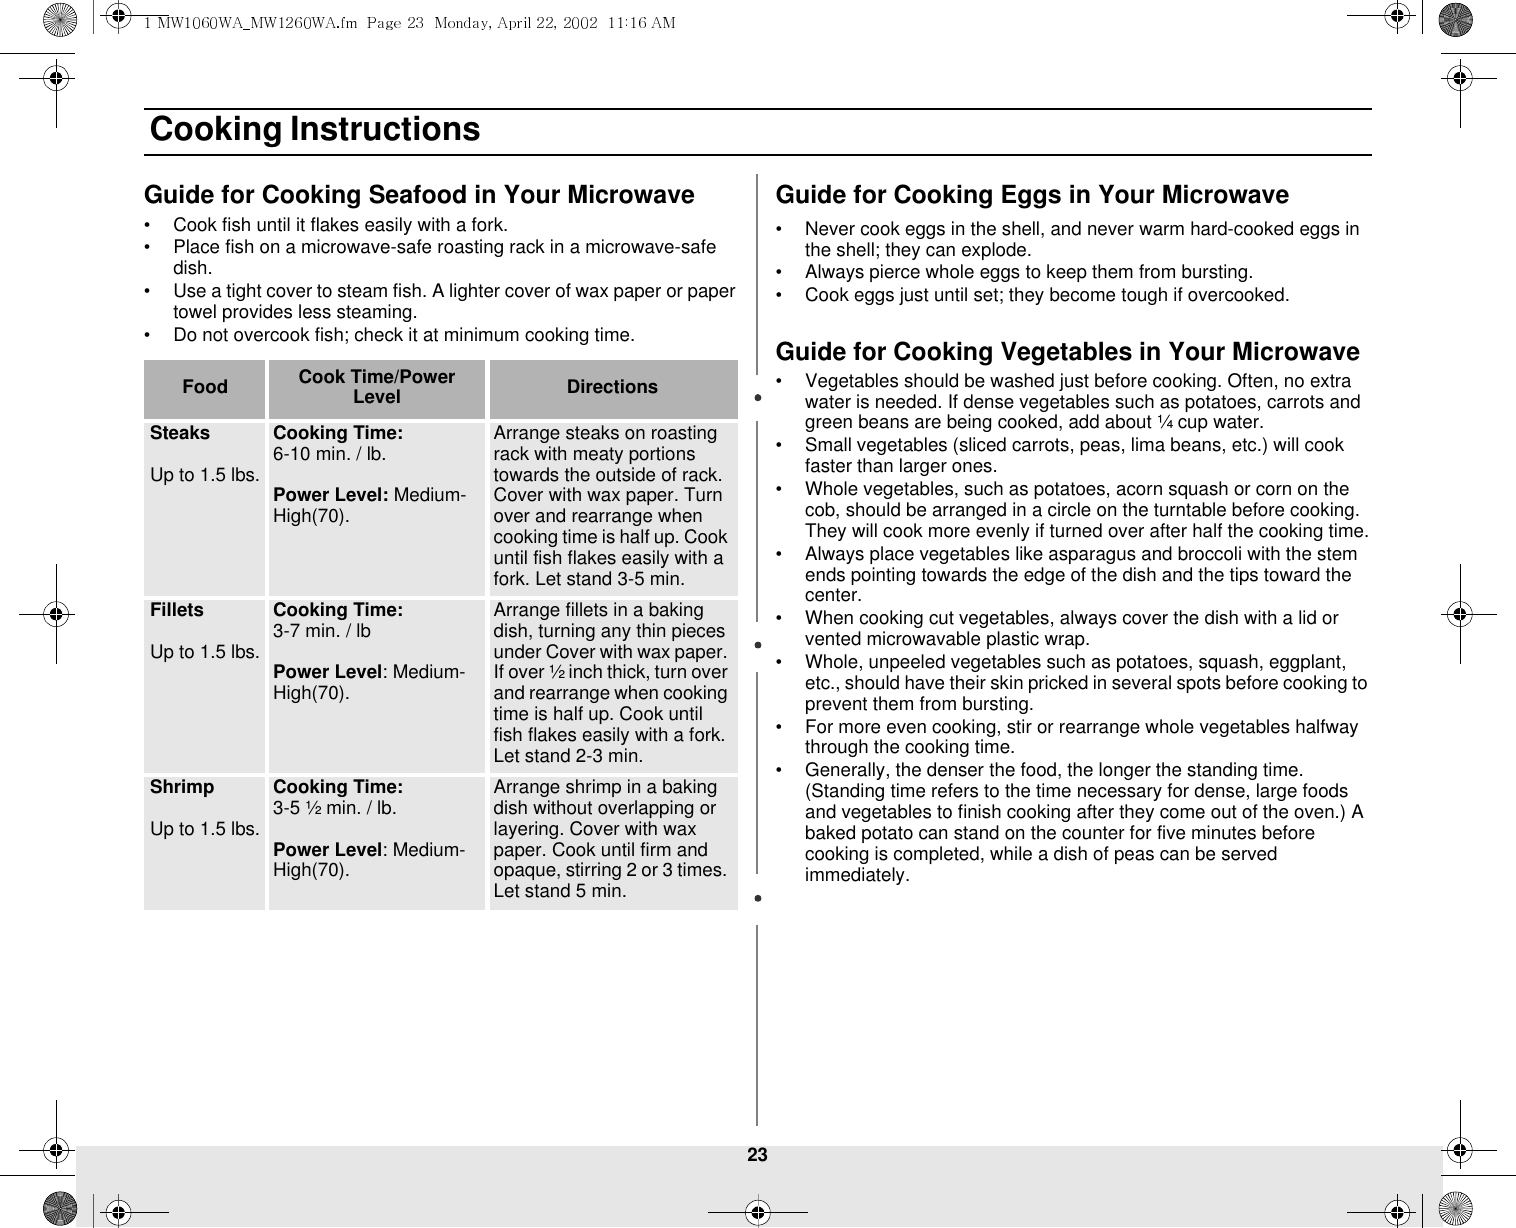 23 Cooking InstructionsGuide for Cooking Seafood in Your Microwave• Cook fish until it flakes easily with a fork.• Place fish on a microwave-safe roasting rack in a microwave-safe dish.• Use a tight cover to steam fish. A lighter cover of wax paper or paper towel provides less steaming.• Do not overcook fish; check it at minimum cooking time.Guide for Cooking Eggs in Your Microwave• Never cook eggs in the shell, and never warm hard-cooked eggs in the shell; they can explode.• Always pierce whole eggs to keep them from bursting.• Cook eggs just until set; they become tough if overcooked.Guide for Cooking Vegetables in Your Microwave• Vegetables should be washed just before cooking. Often, no extra water is needed. If dense vegetables such as potatoes, carrots and green beans are being cooked, add about ¼ cup water.• Small vegetables (sliced carrots, peas, lima beans, etc.) will cook faster than larger ones.• Whole vegetables, such as potatoes, acorn squash or corn on the cob, should be arranged in a circle on the turntable before cooking. They will cook more evenly if turned over after half the cooking time.• Always place vegetables like asparagus and broccoli with the stem ends pointing towards the edge of the dish and the tips toward the center.• When cooking cut vegetables, always cover the dish with a lid or vented microwavable plastic wrap.• Whole, unpeeled vegetables such as potatoes, squash, eggplant, etc., should have their skin pricked in several spots before cooking to prevent them from bursting.• For more even cooking, stir or rearrange whole vegetables halfway through the cooking time.• Generally, the denser the food, the longer the standing time. (Standing time refers to the time necessary for dense, large foods and vegetables to finish cooking after they come out of the oven.) A baked potato can stand on the counter for five minutes before cooking is completed, while a dish of peas can be served immediately.Food Cook Time/Power Level DirectionsSteaksUp to 1.5 lbs.Cooking Time: 6-10 min. / lb. Power Level: Medium-High(70).Arrange steaks on roasting rack with meaty portions towards the outside of rack. Cover with wax paper. Turn over and rearrange when cooking time is half up. Cook until fish flakes easily with a fork. Let stand 3-5 min. FilletsUp to 1.5 lbs.Cooking Time: 3-7 min. / lbPower Level: Medium-High(70).Arrange fillets in a baking dish, turning any thin pieces under Cover with wax paper. If over ½ inch thick, turn over and rearrange when cooking time is half up. Cook until fish flakes easily with a fork. Let stand 2-3 min.ShrimpUp to 1.5 lbs.Cooking Time: 3-5 ½ min. / lb.Power Level: Medium-High(70).Arrange shrimp in a baking dish without overlapping or layering. Cover with wax paper. Cook until firm and opaque, stirring 2 or 3 times. Let stand 5 min. 